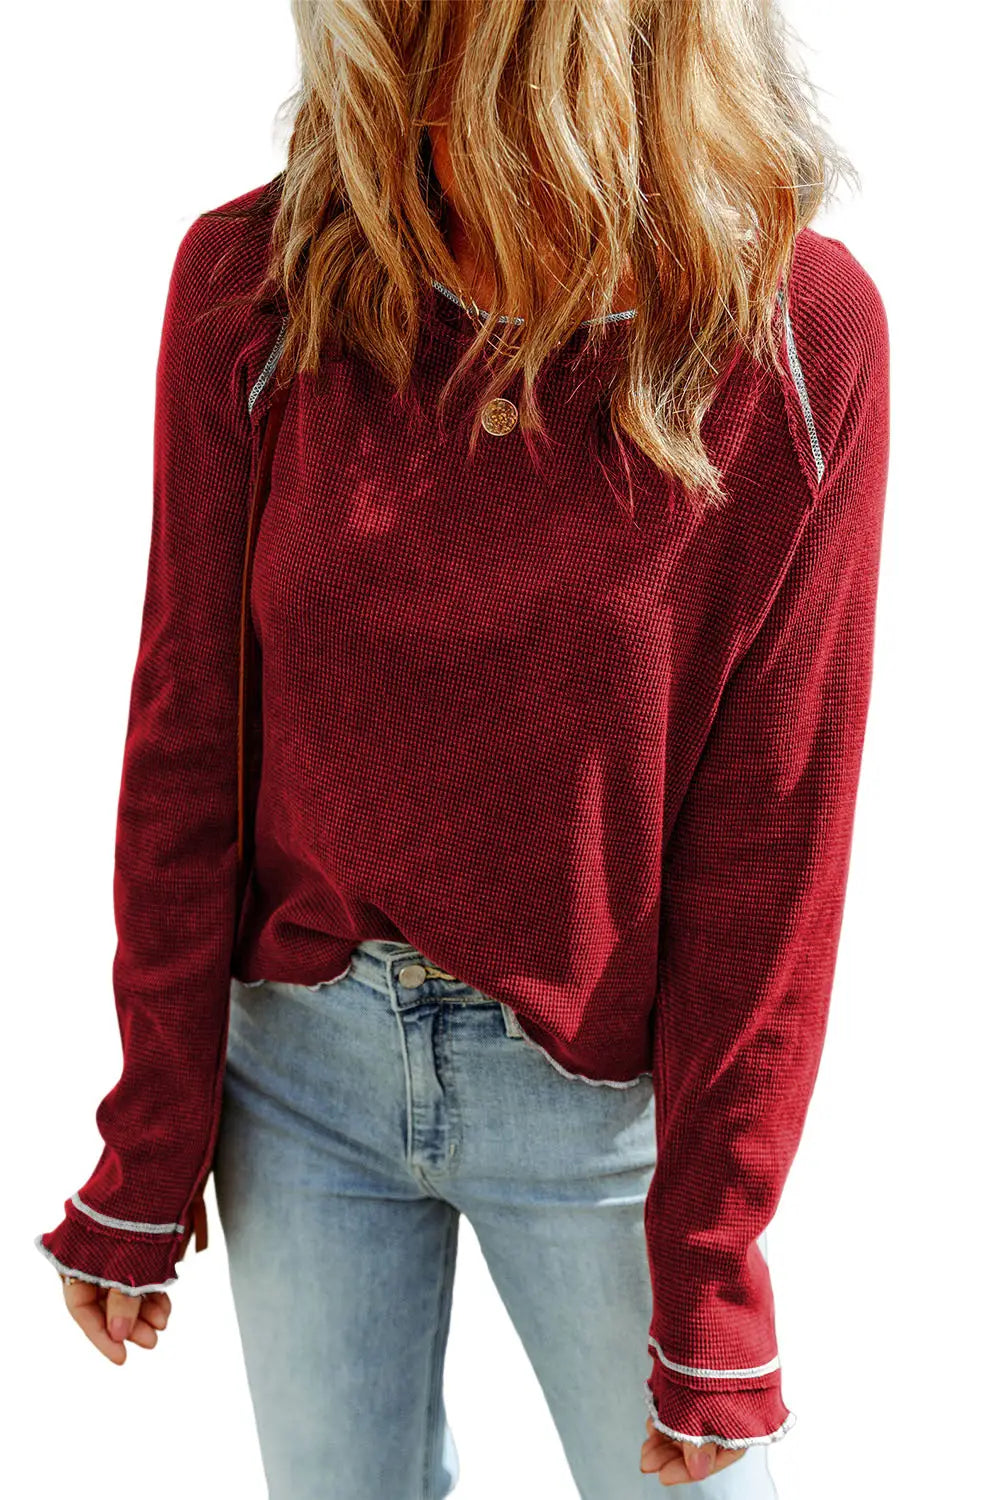 Brown textured round neck long sleeve top - tops